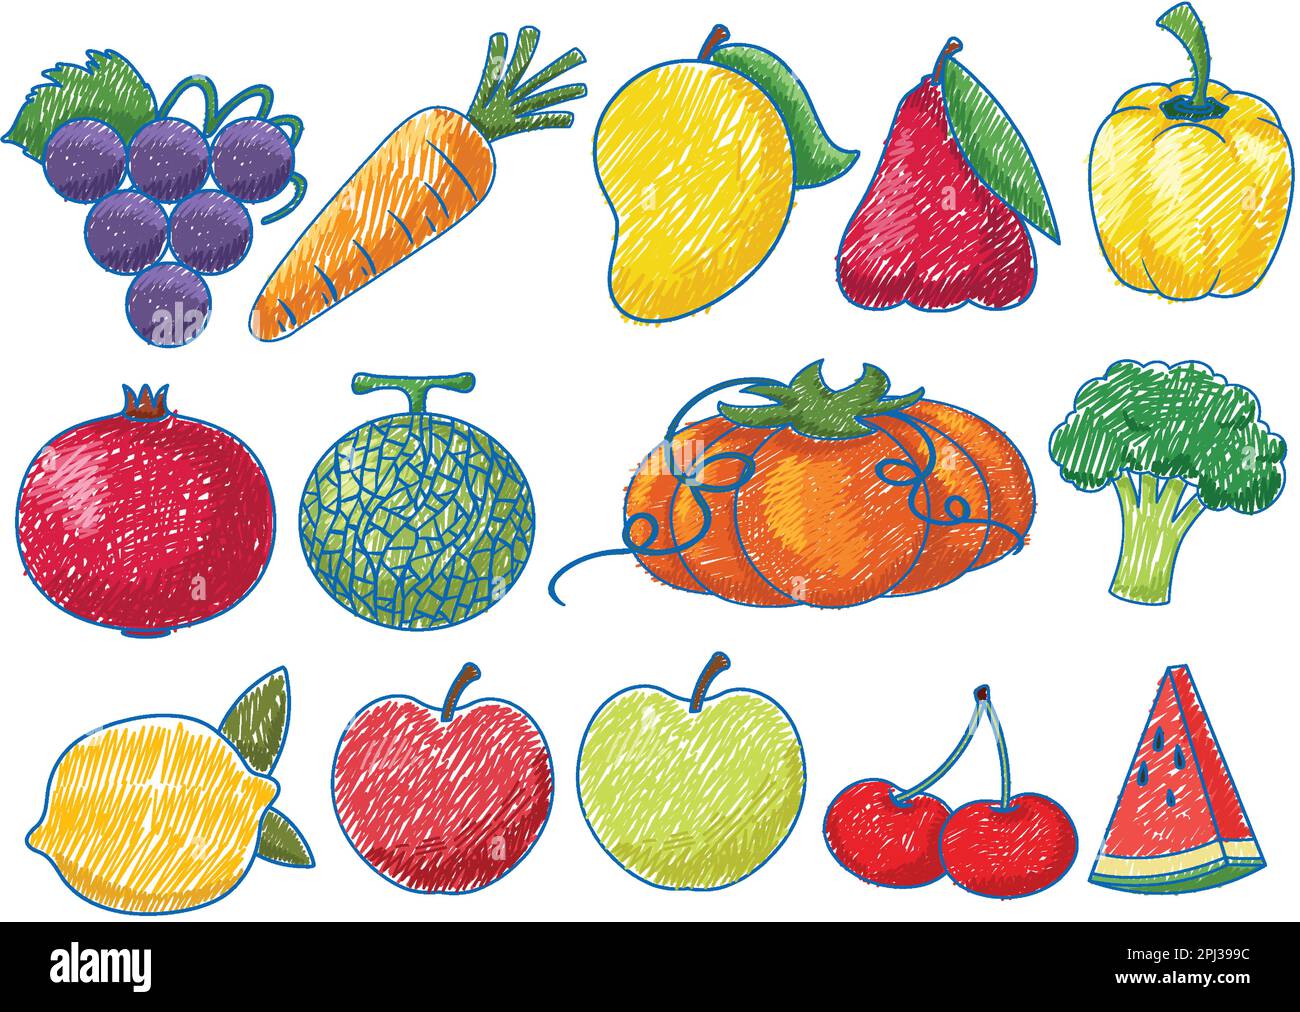 Easy How to Draw Vegetables Tutorial and Vegetable Coloring Page